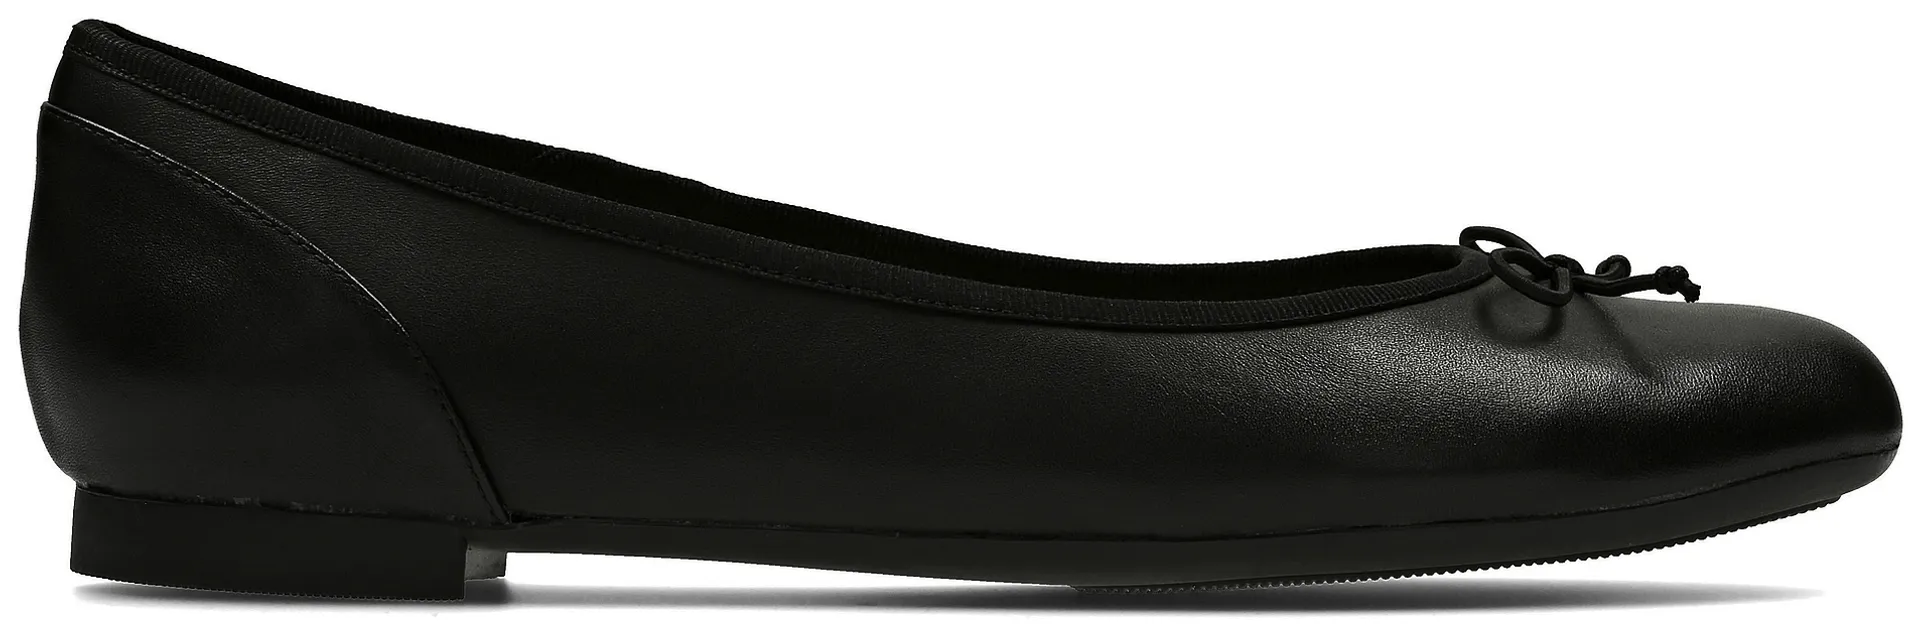 Clarks Couture Bloom avokkaat - Black Leather - 1